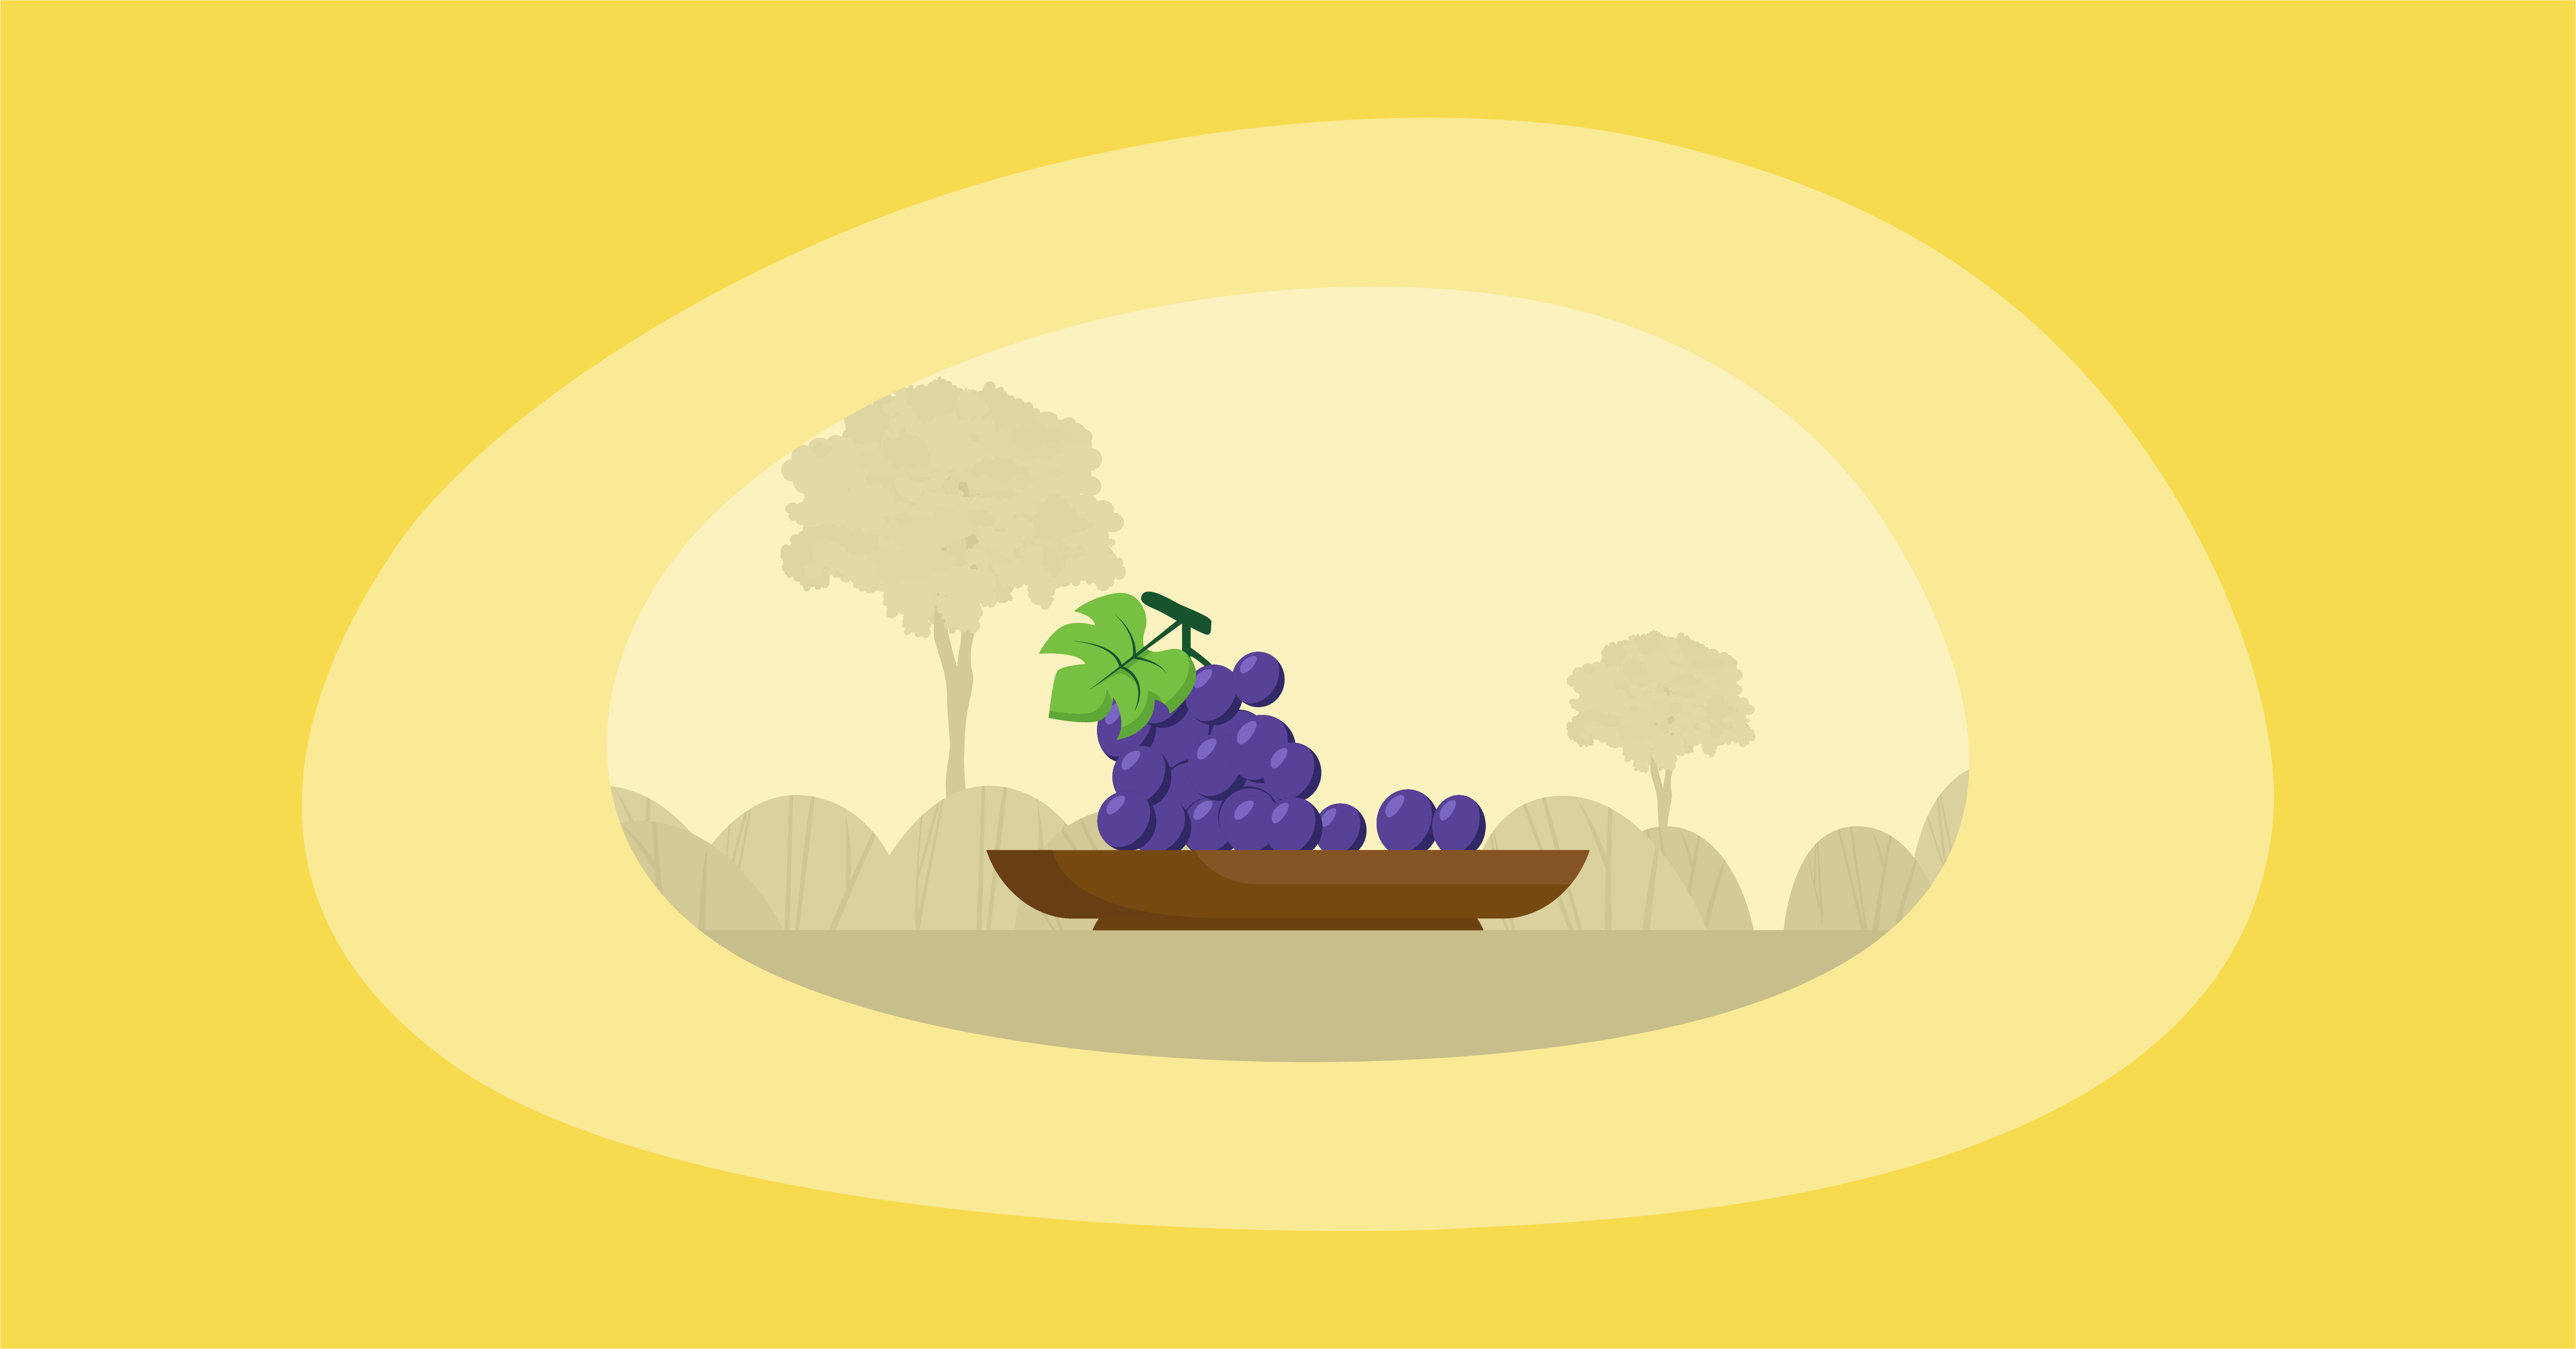 Illustration of grapes in a wooden platter